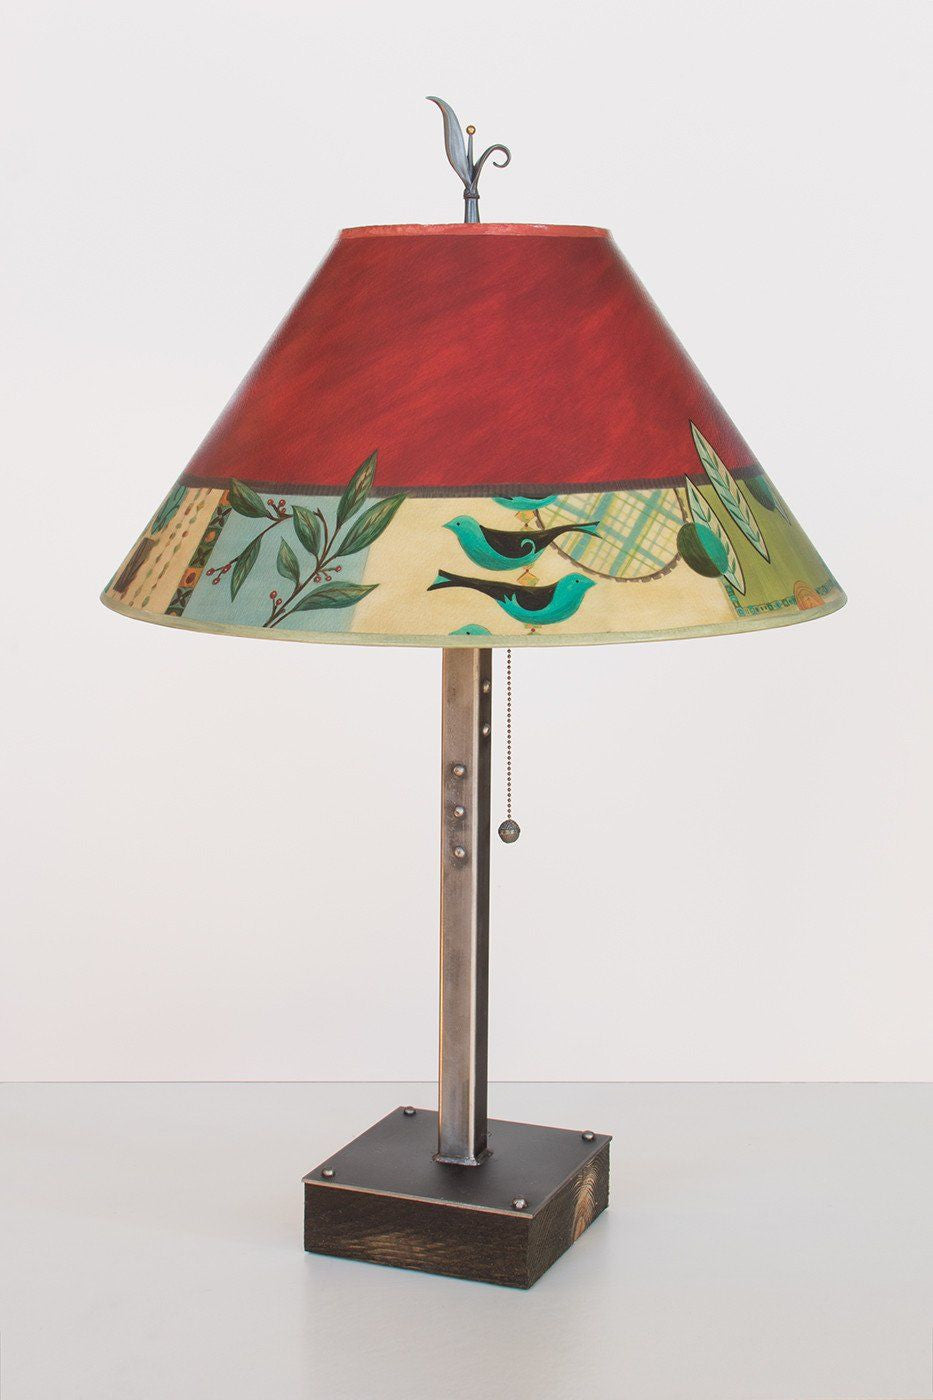 Janna Ugone & Co Table Lamps Steel Table Lamp on Wood with Large Conical Shade in New Capri